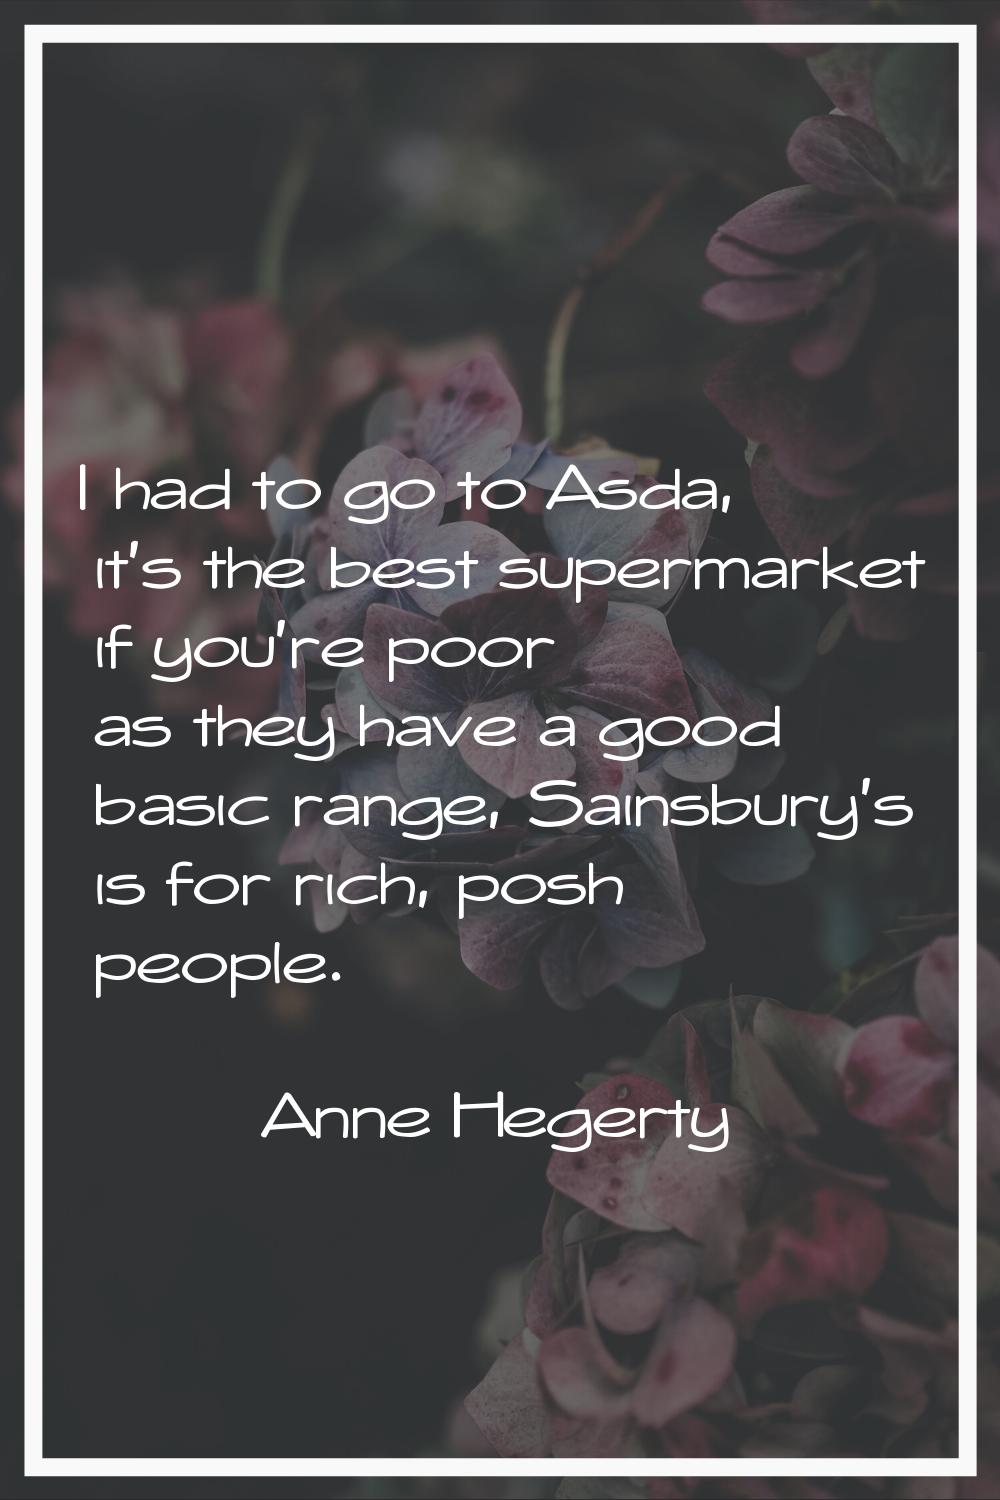 I had to go to Asda, it's the best supermarket if you're poor as they have a good basic range, Sain